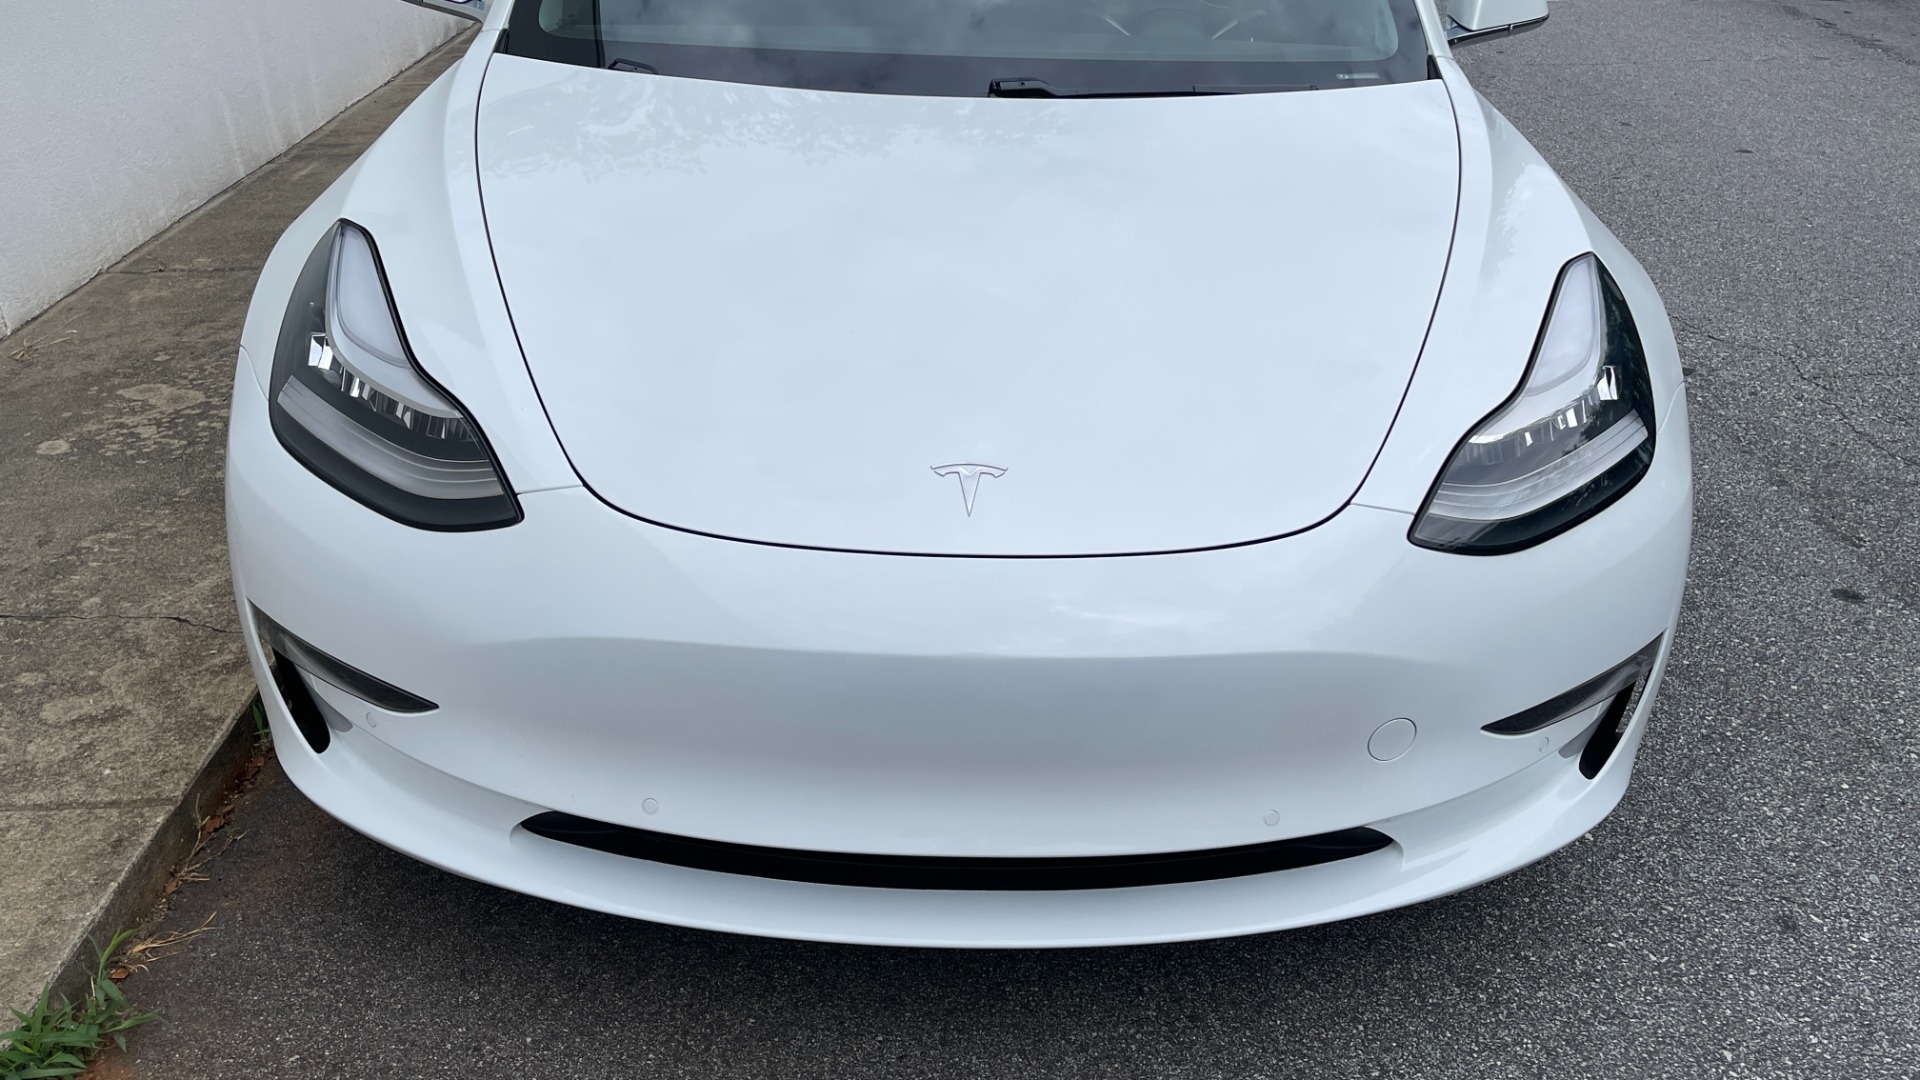 Used 2020 Tesla Model 3 STANDARD RANGE PLUS / AUTOPILOT / STANDARD CONNECTIVITY / PEARL WHITE for sale $49,595 at Formula Imports in Charlotte NC 28227 4